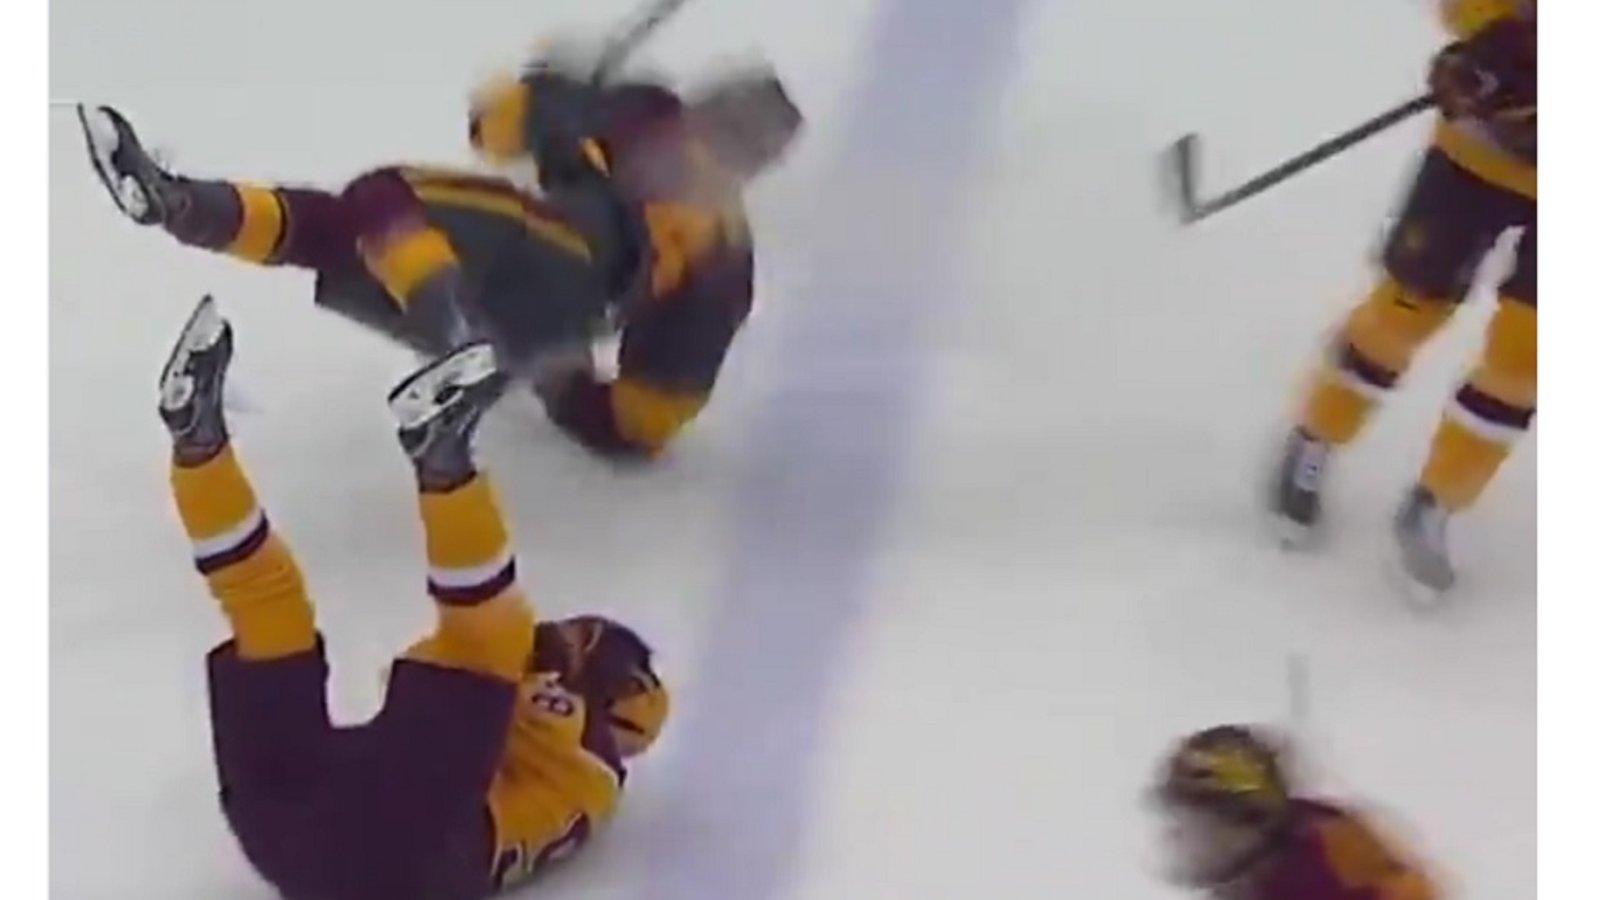 Insane college hockey hit is the most brutal impact of the year.